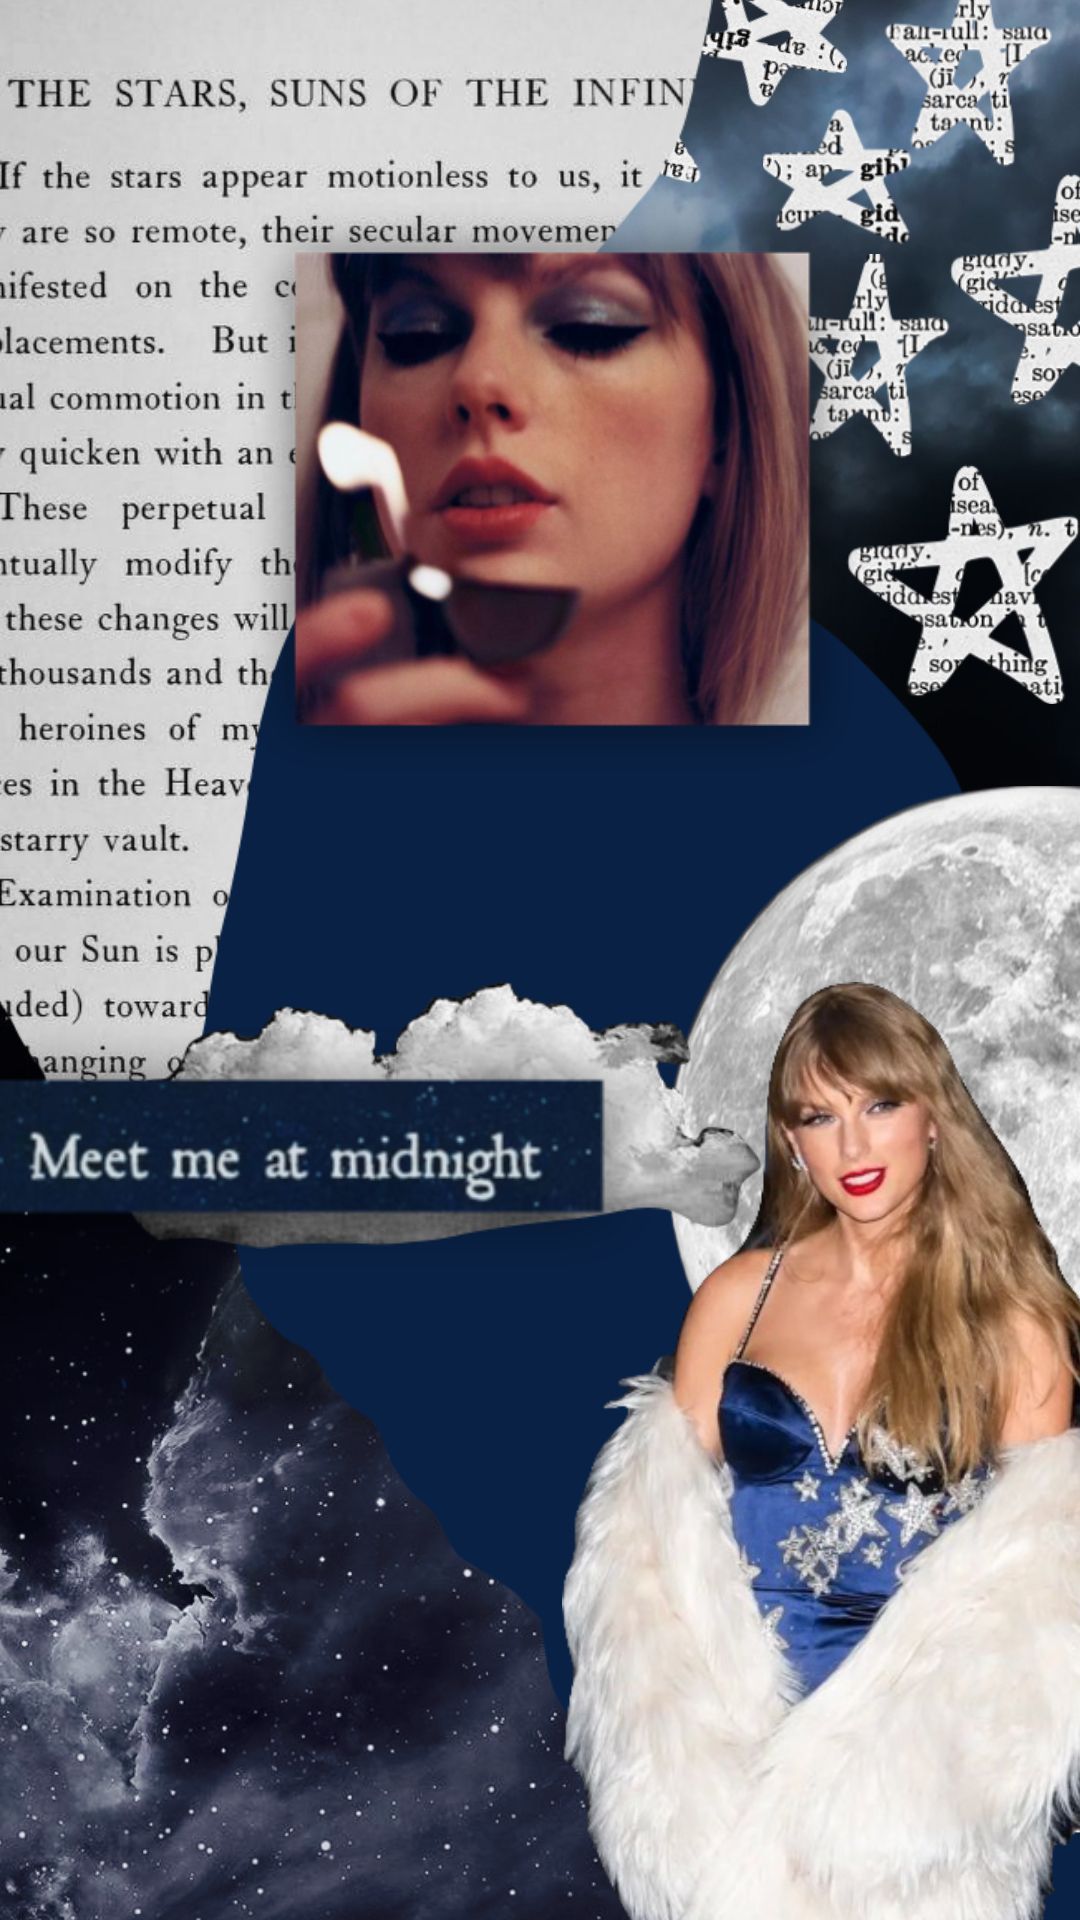 Taylor Swift, meet me at midnight, wallpaper, aesthetic - Taylor Swift